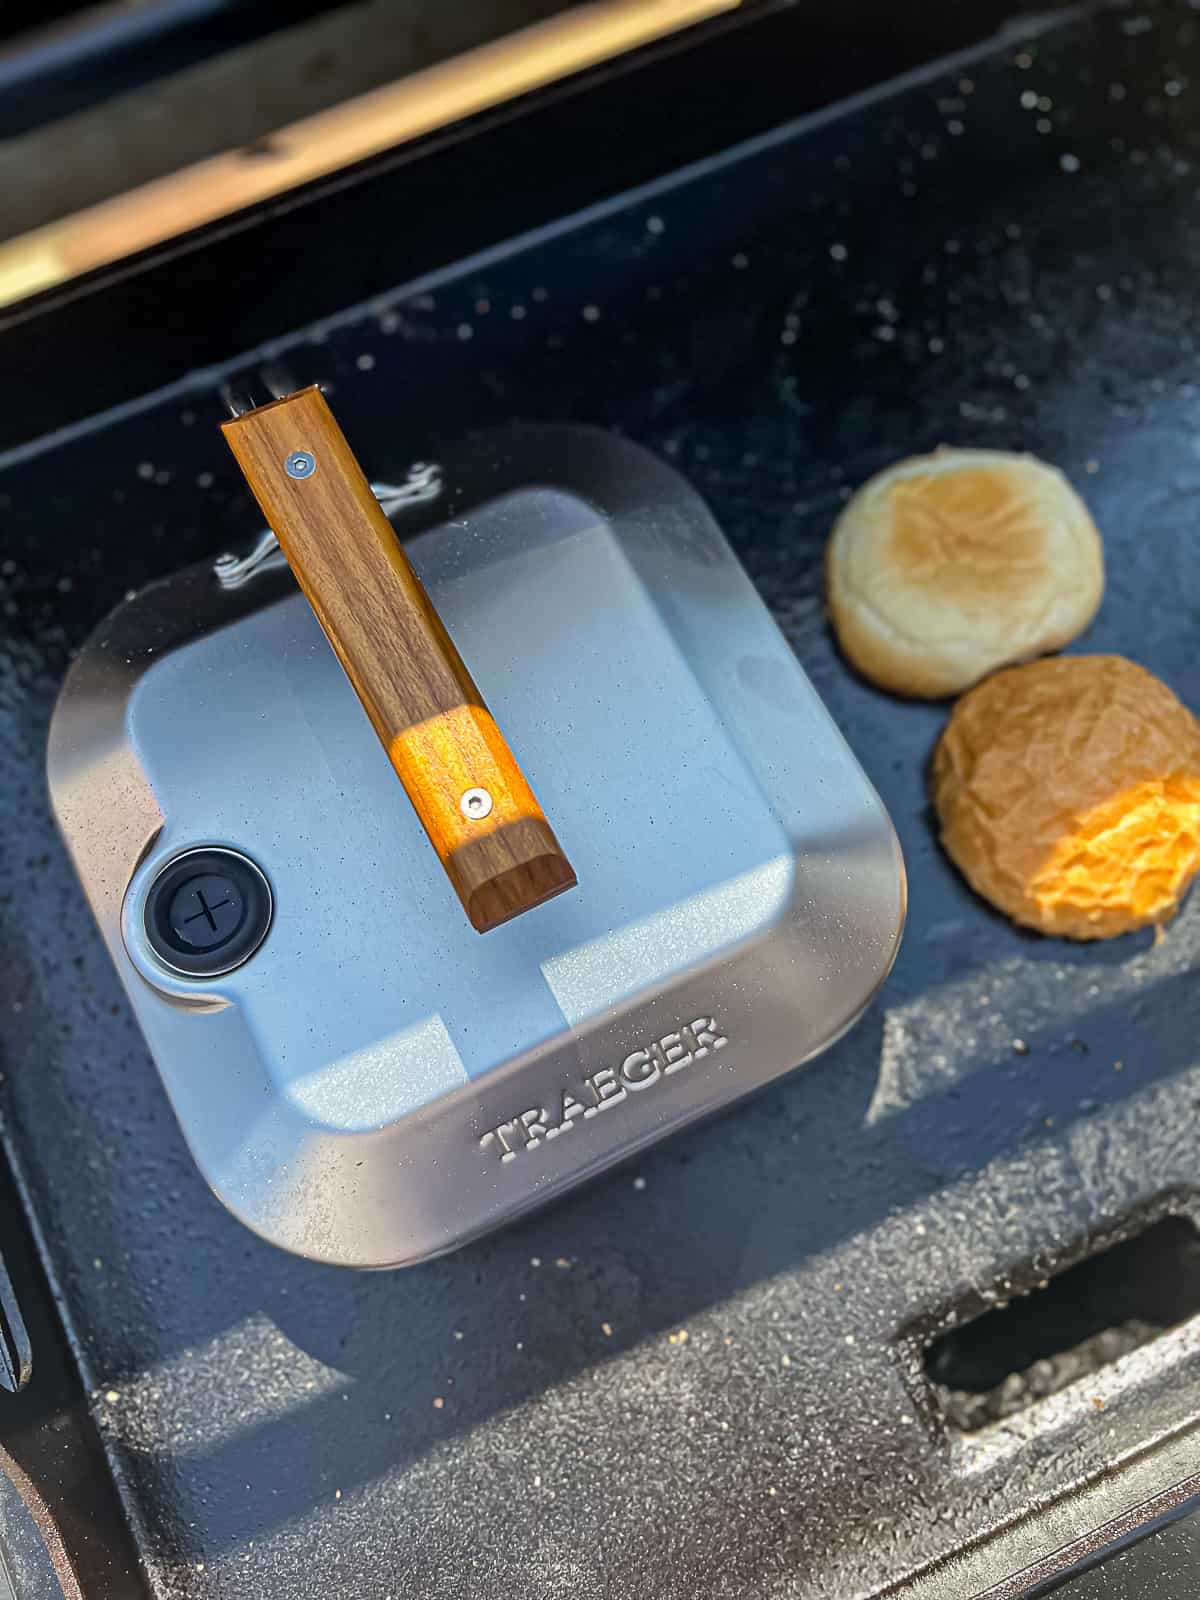 Traeger Flatrock Griddle cooking smashed burgers with a steam dome tool